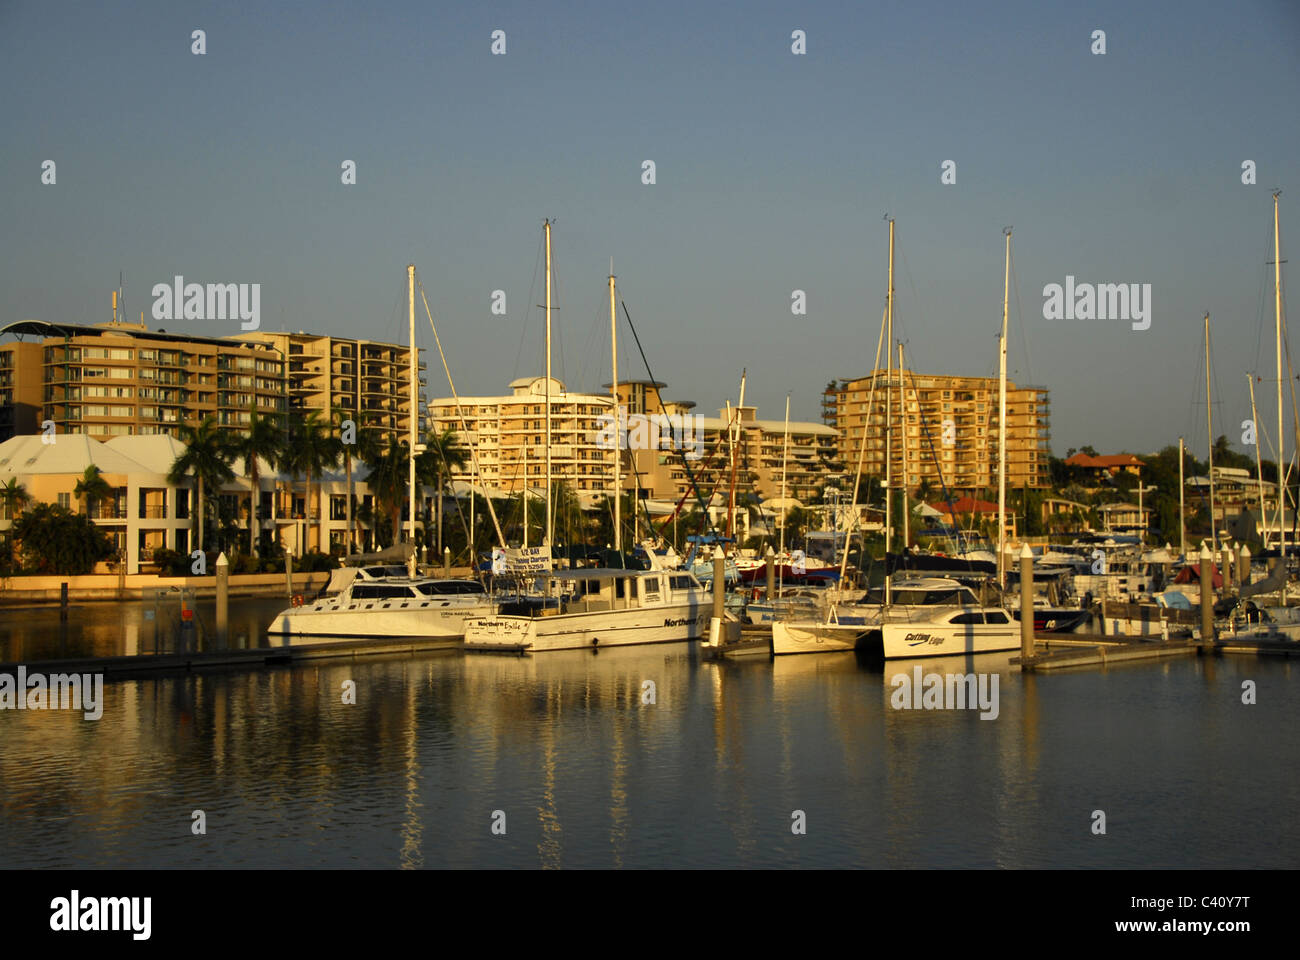 Cullen Bay Marina in Darwin, Northern Territory, Australia, in the early evening hours. Stock Photo